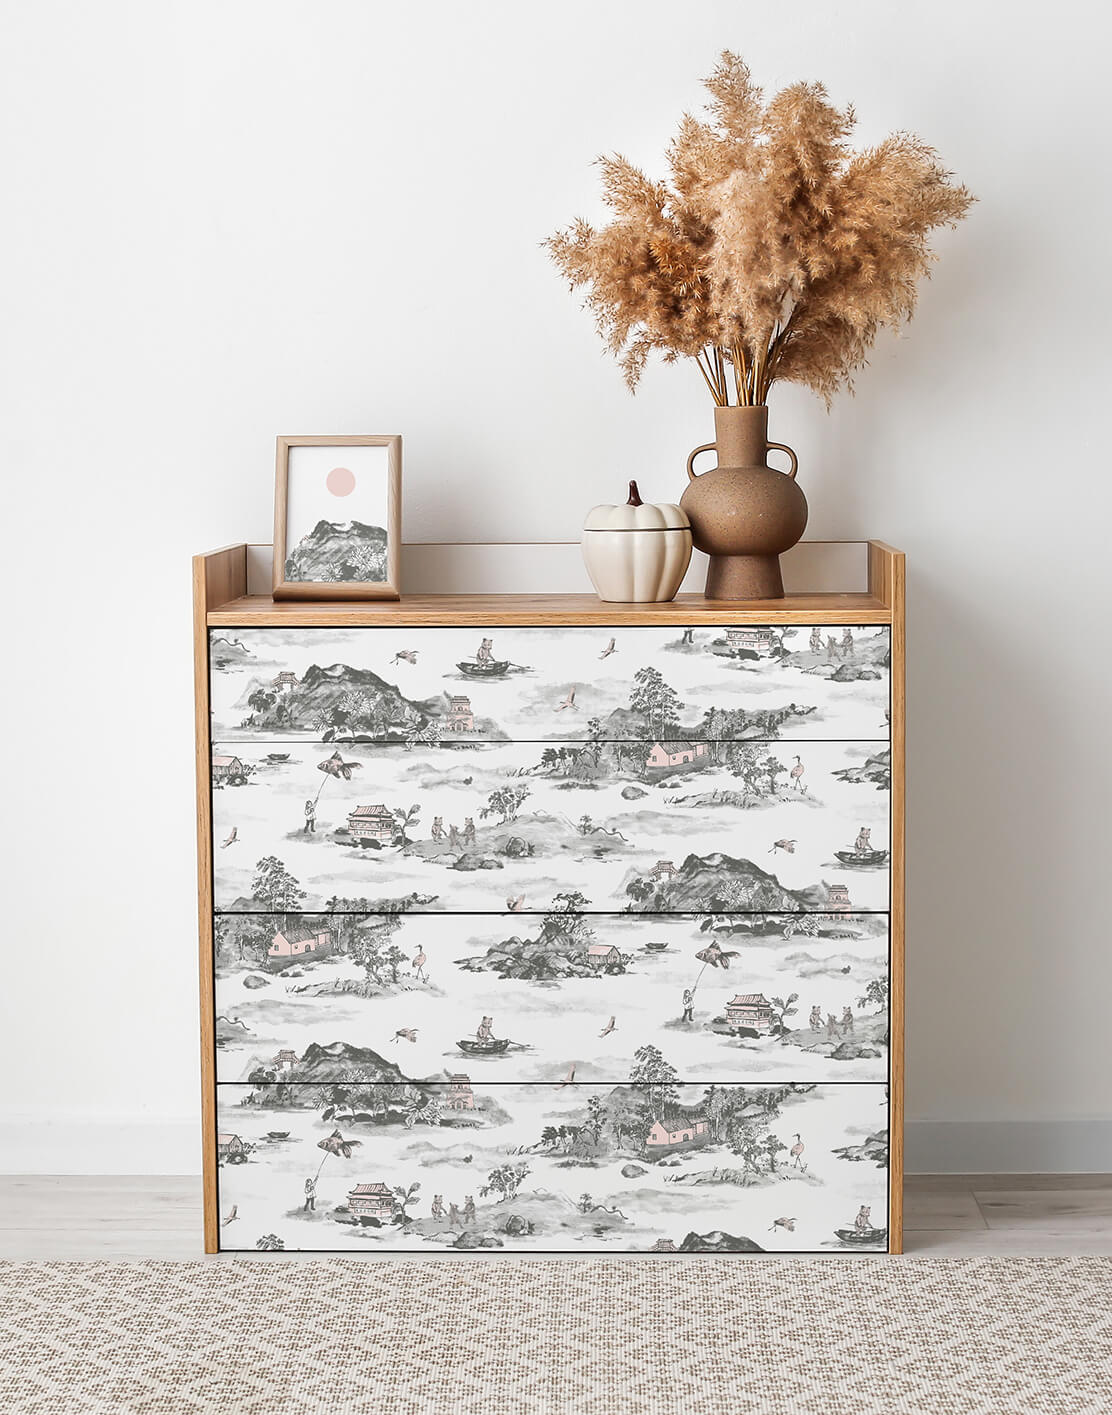 3 Brilliant Ways to Upcycle Furniture with Wallpaper